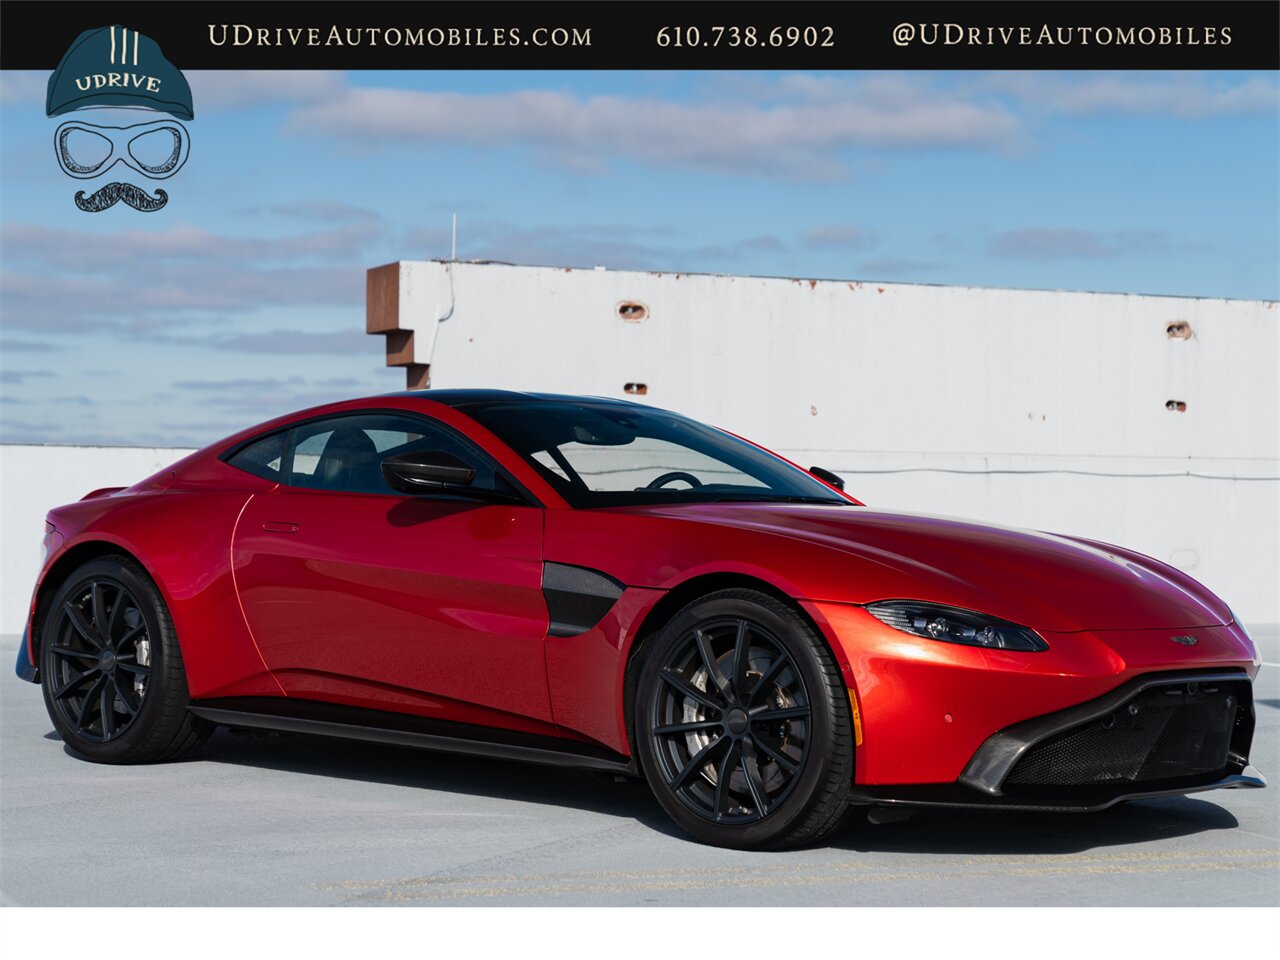 2019 Aston Martin Vantage  Incredibly Spec Rare Q Exclusive Fiamma Red $222k MSRP 1 of a Kind CPO - Photo 17 - West Chester, PA 19382